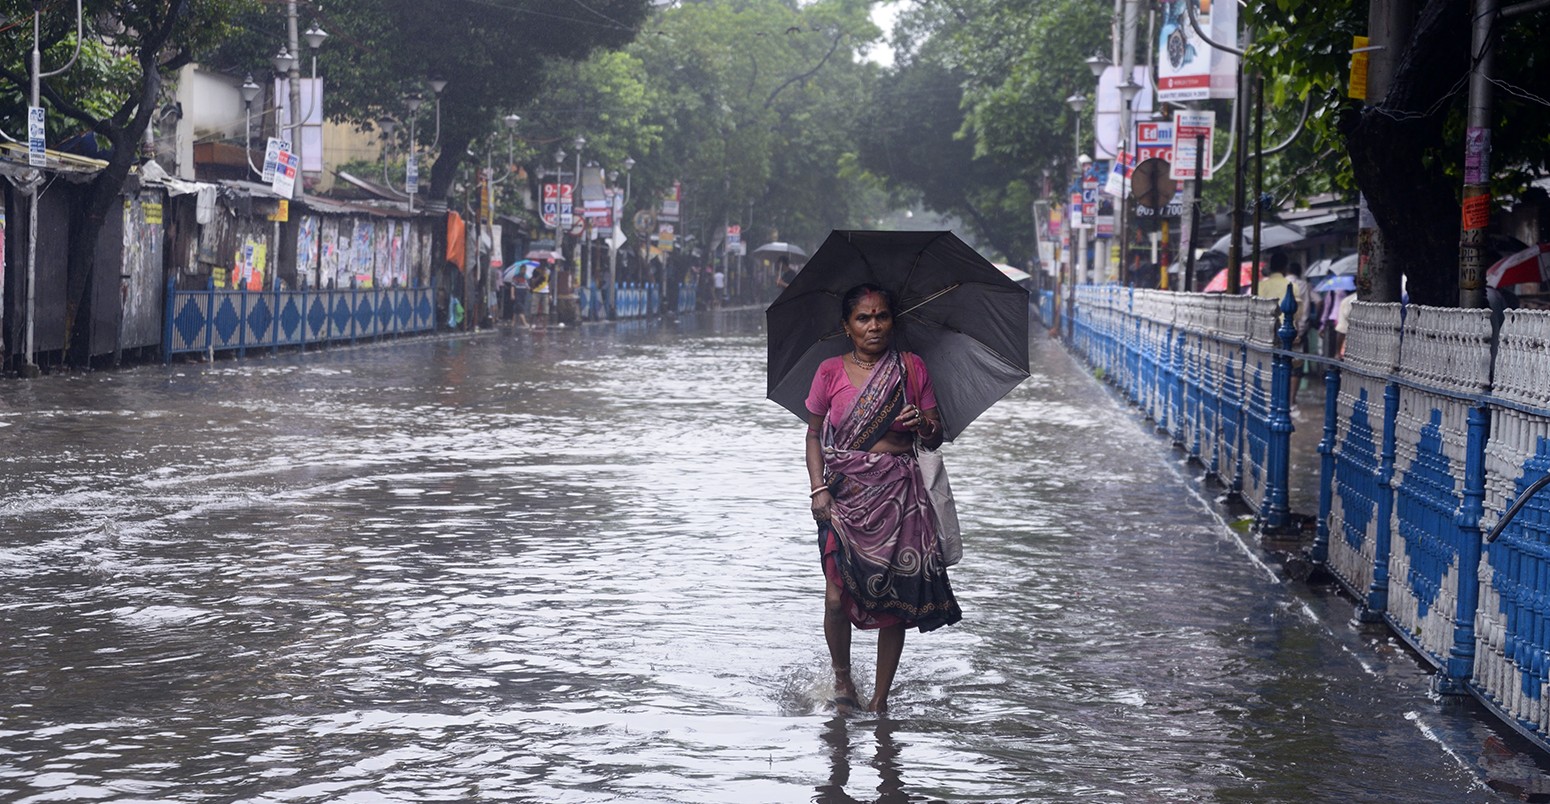 Indian woman walks in a flooded street of Calcutta, India.